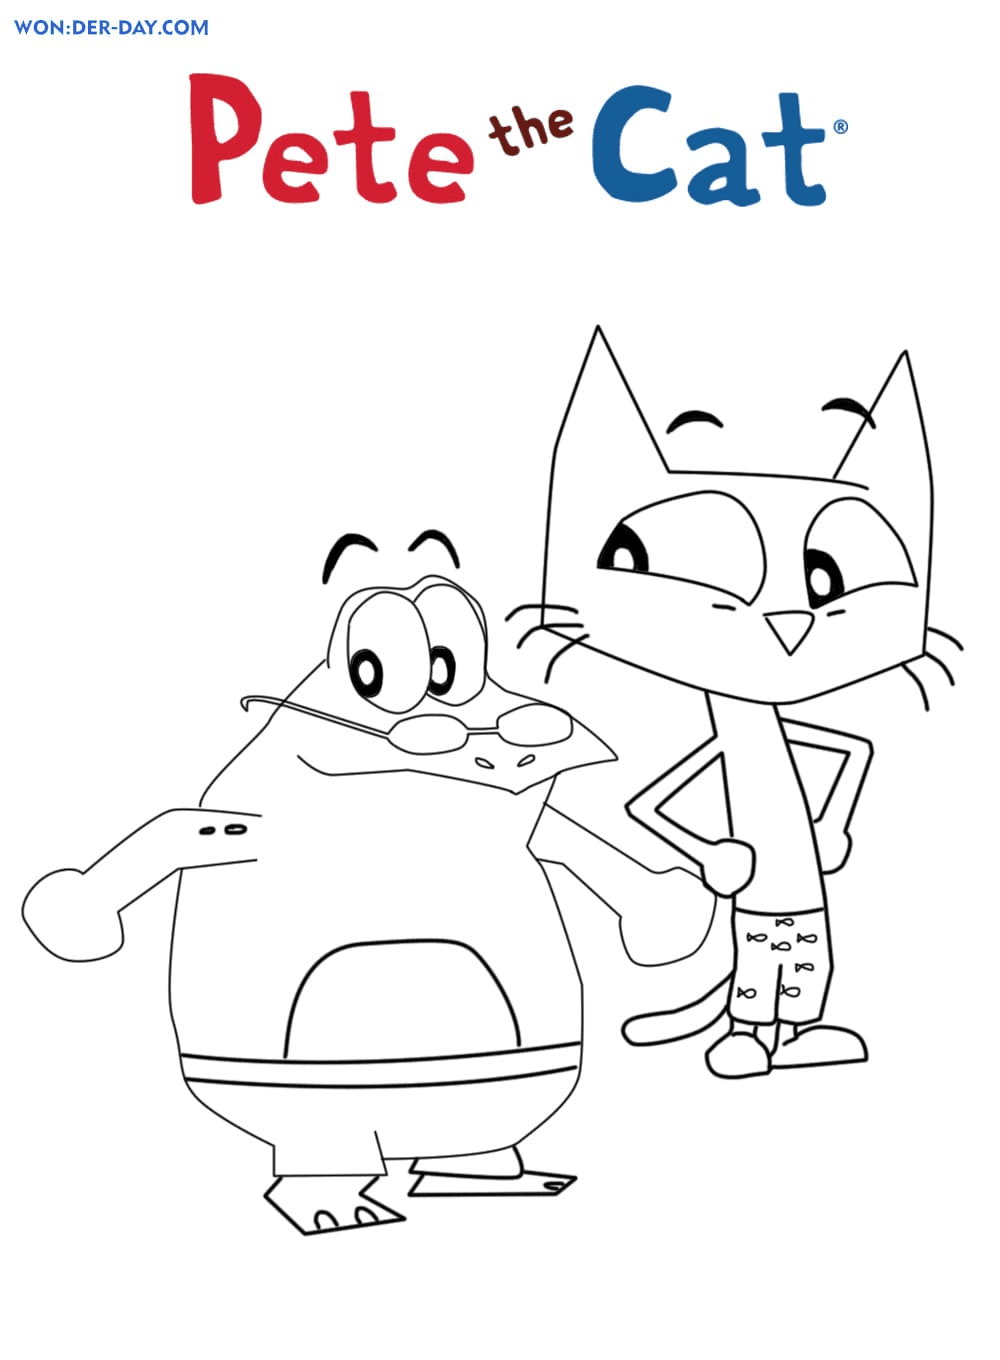 Pete the Cat and Grumpy Toad Coloring Page